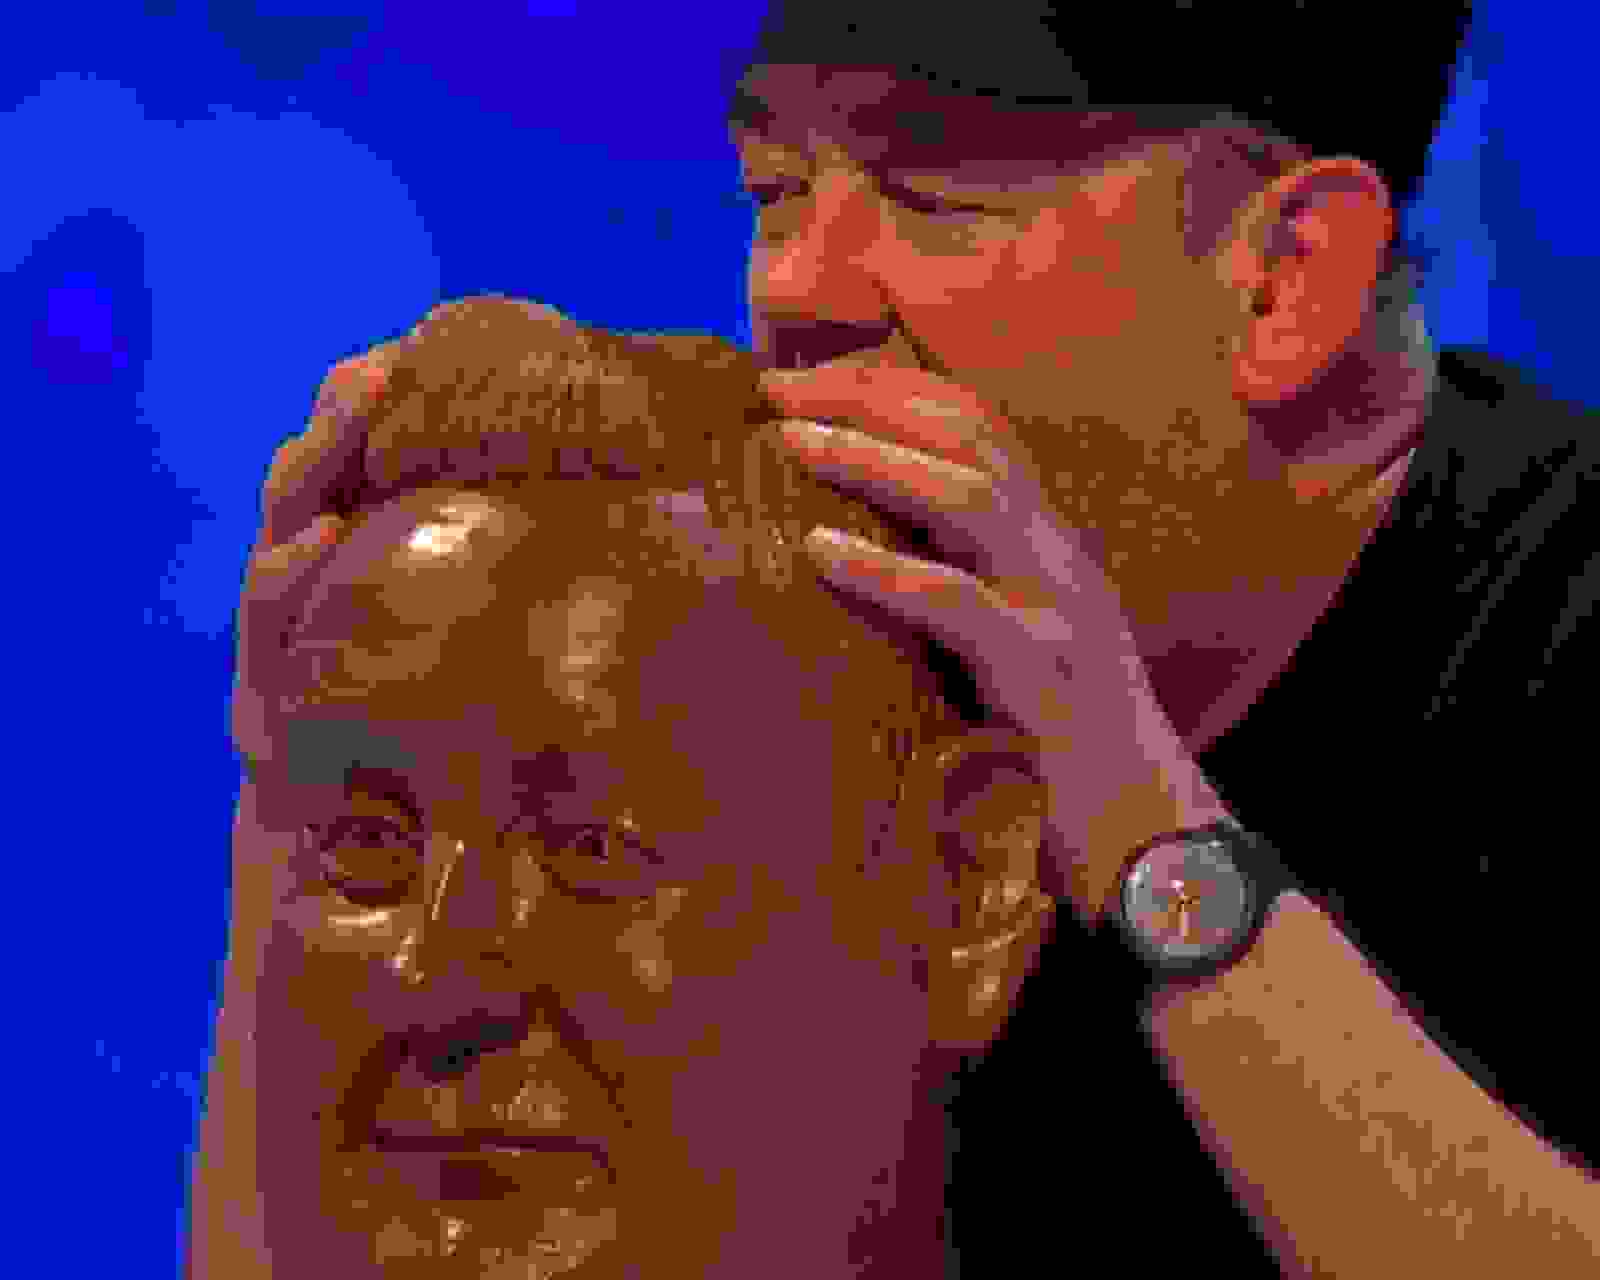 Johnny Vegas With Chocolate Head Sculpture